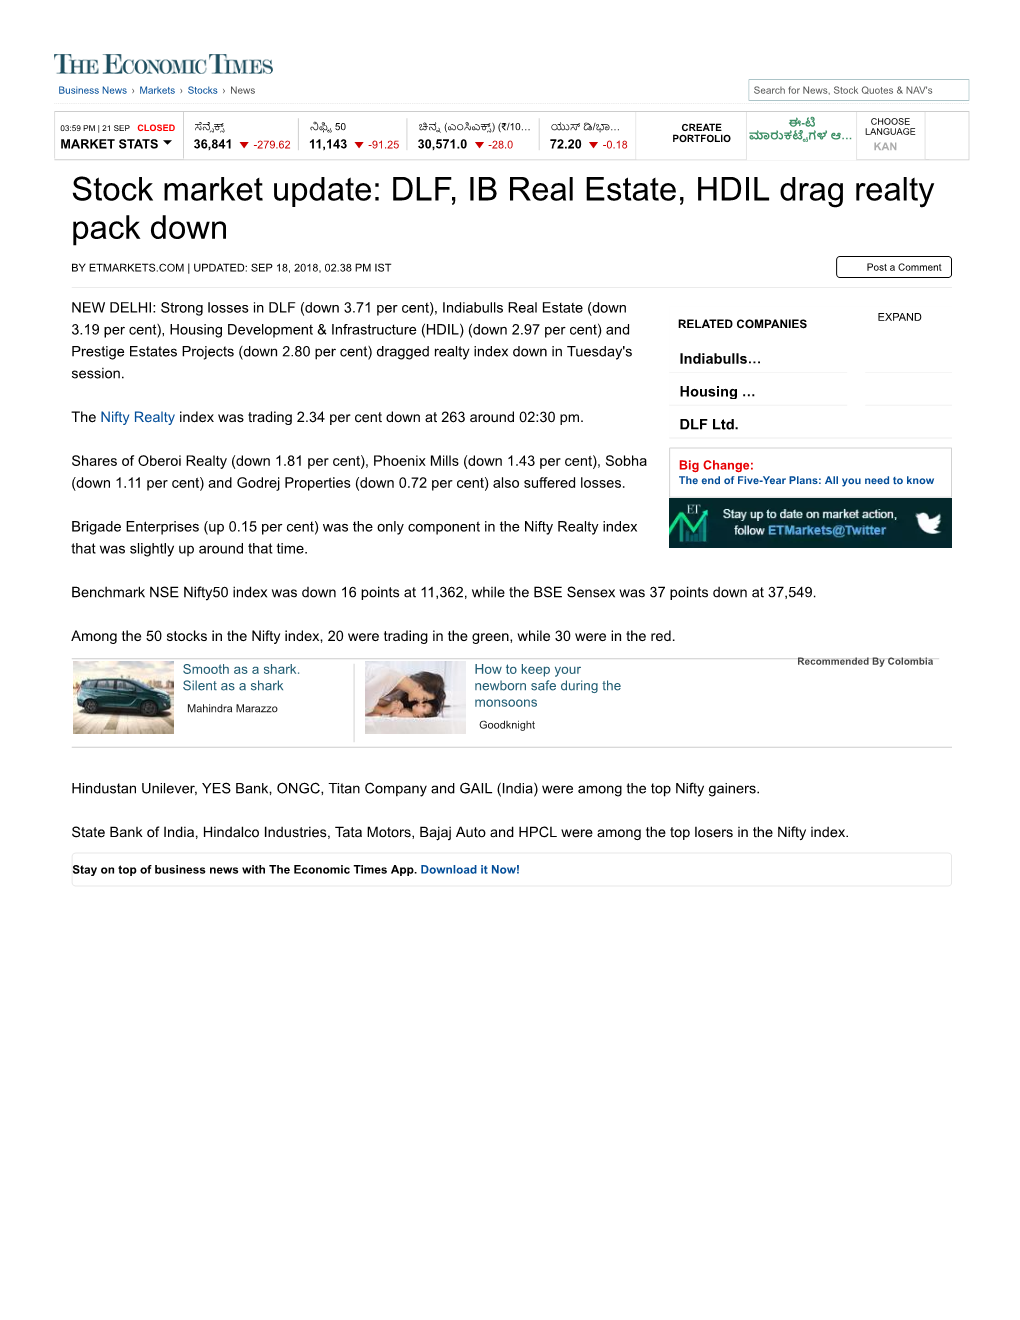 Stock Market Update: DLF, IB Real Estate, HDIL Drag Realty Pack Down